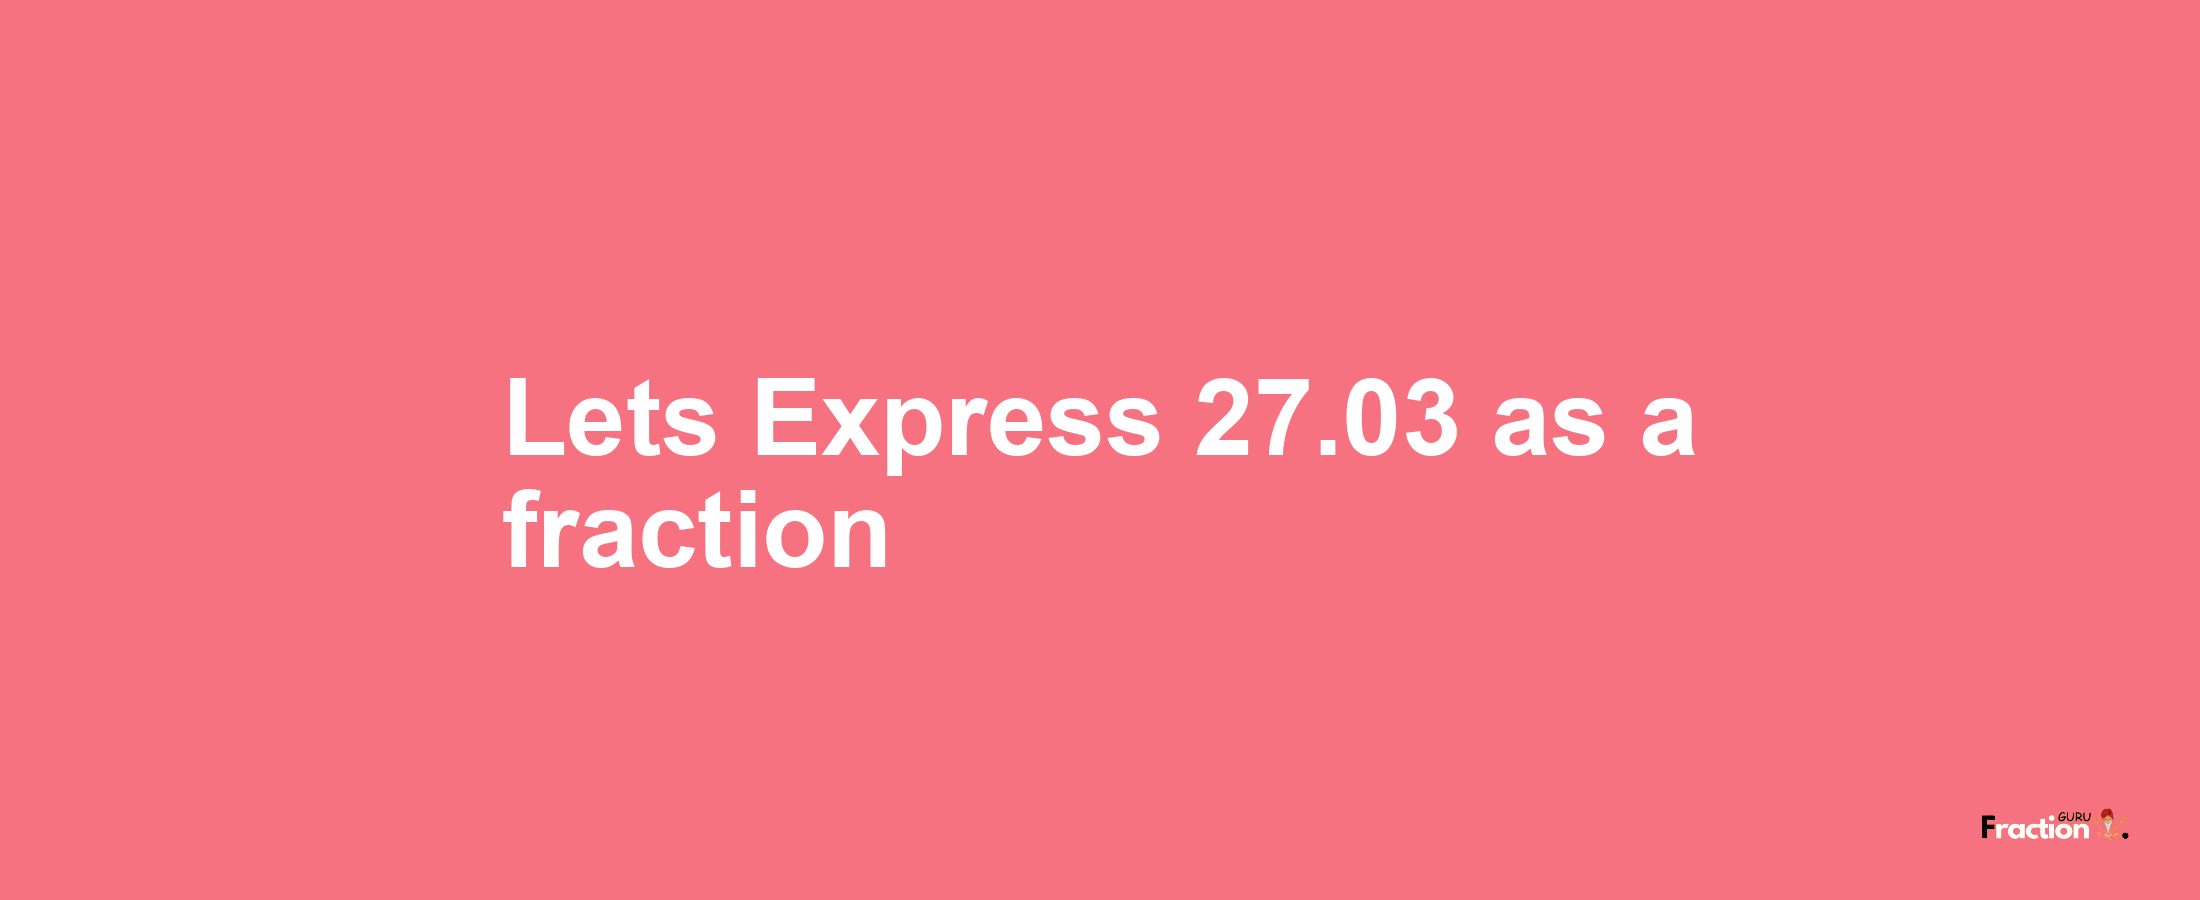 Lets Express 27.03 as afraction